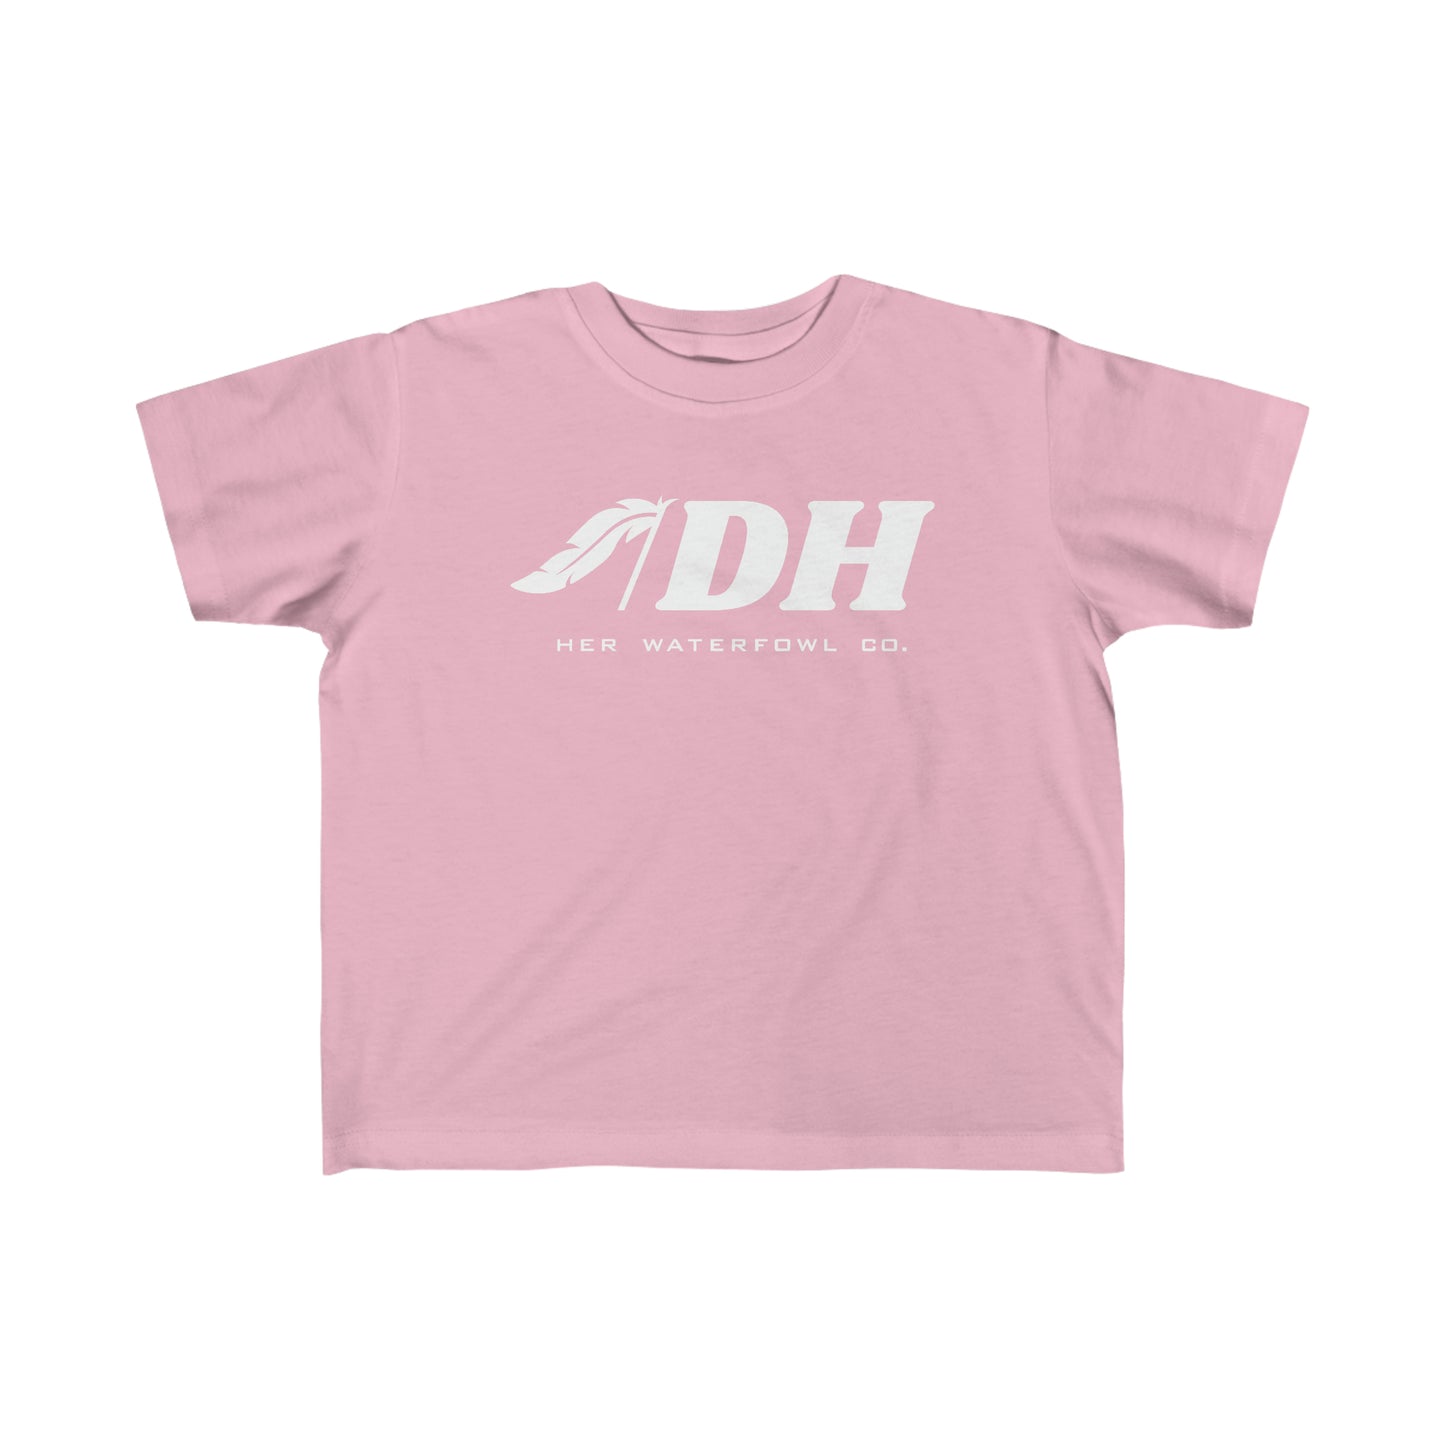 Toddler Chase Tee (White Ink Versions)